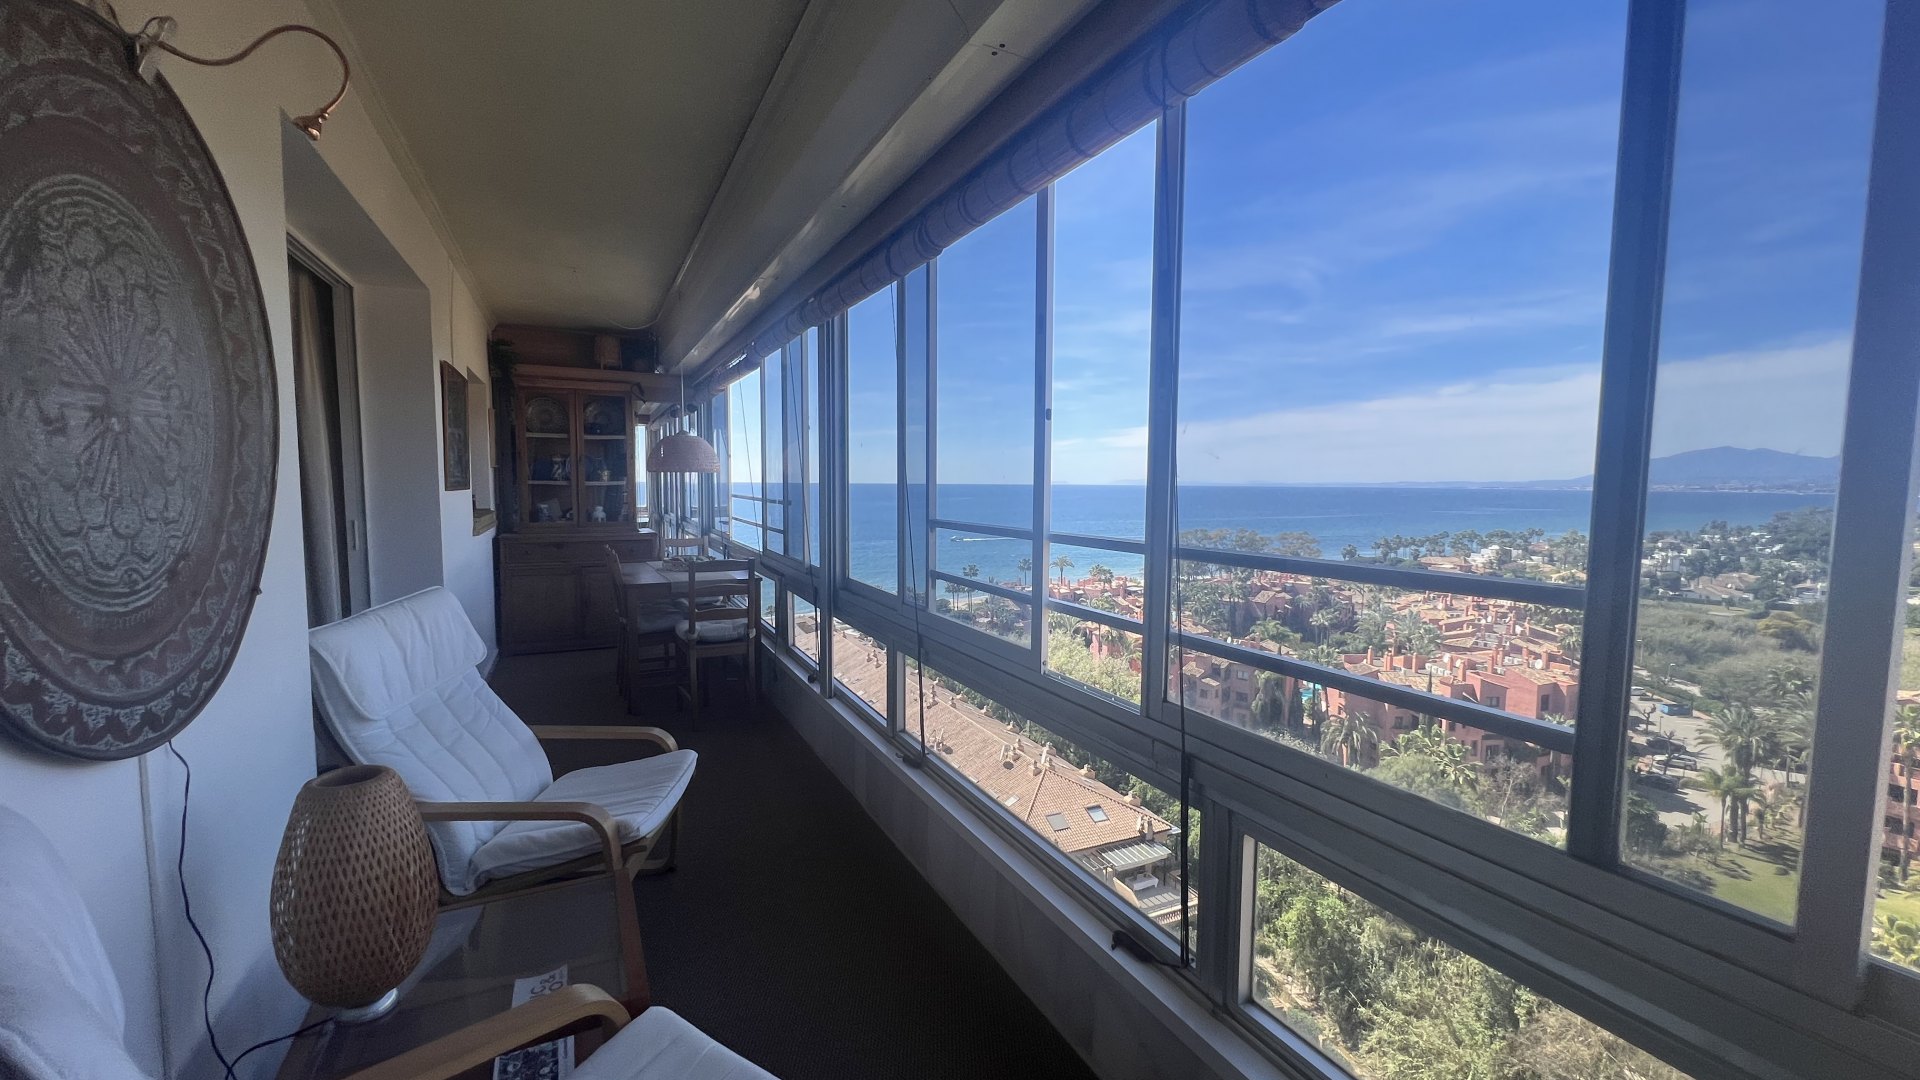 Spectacular apartment, located in Marbella East, overlooking the sea.